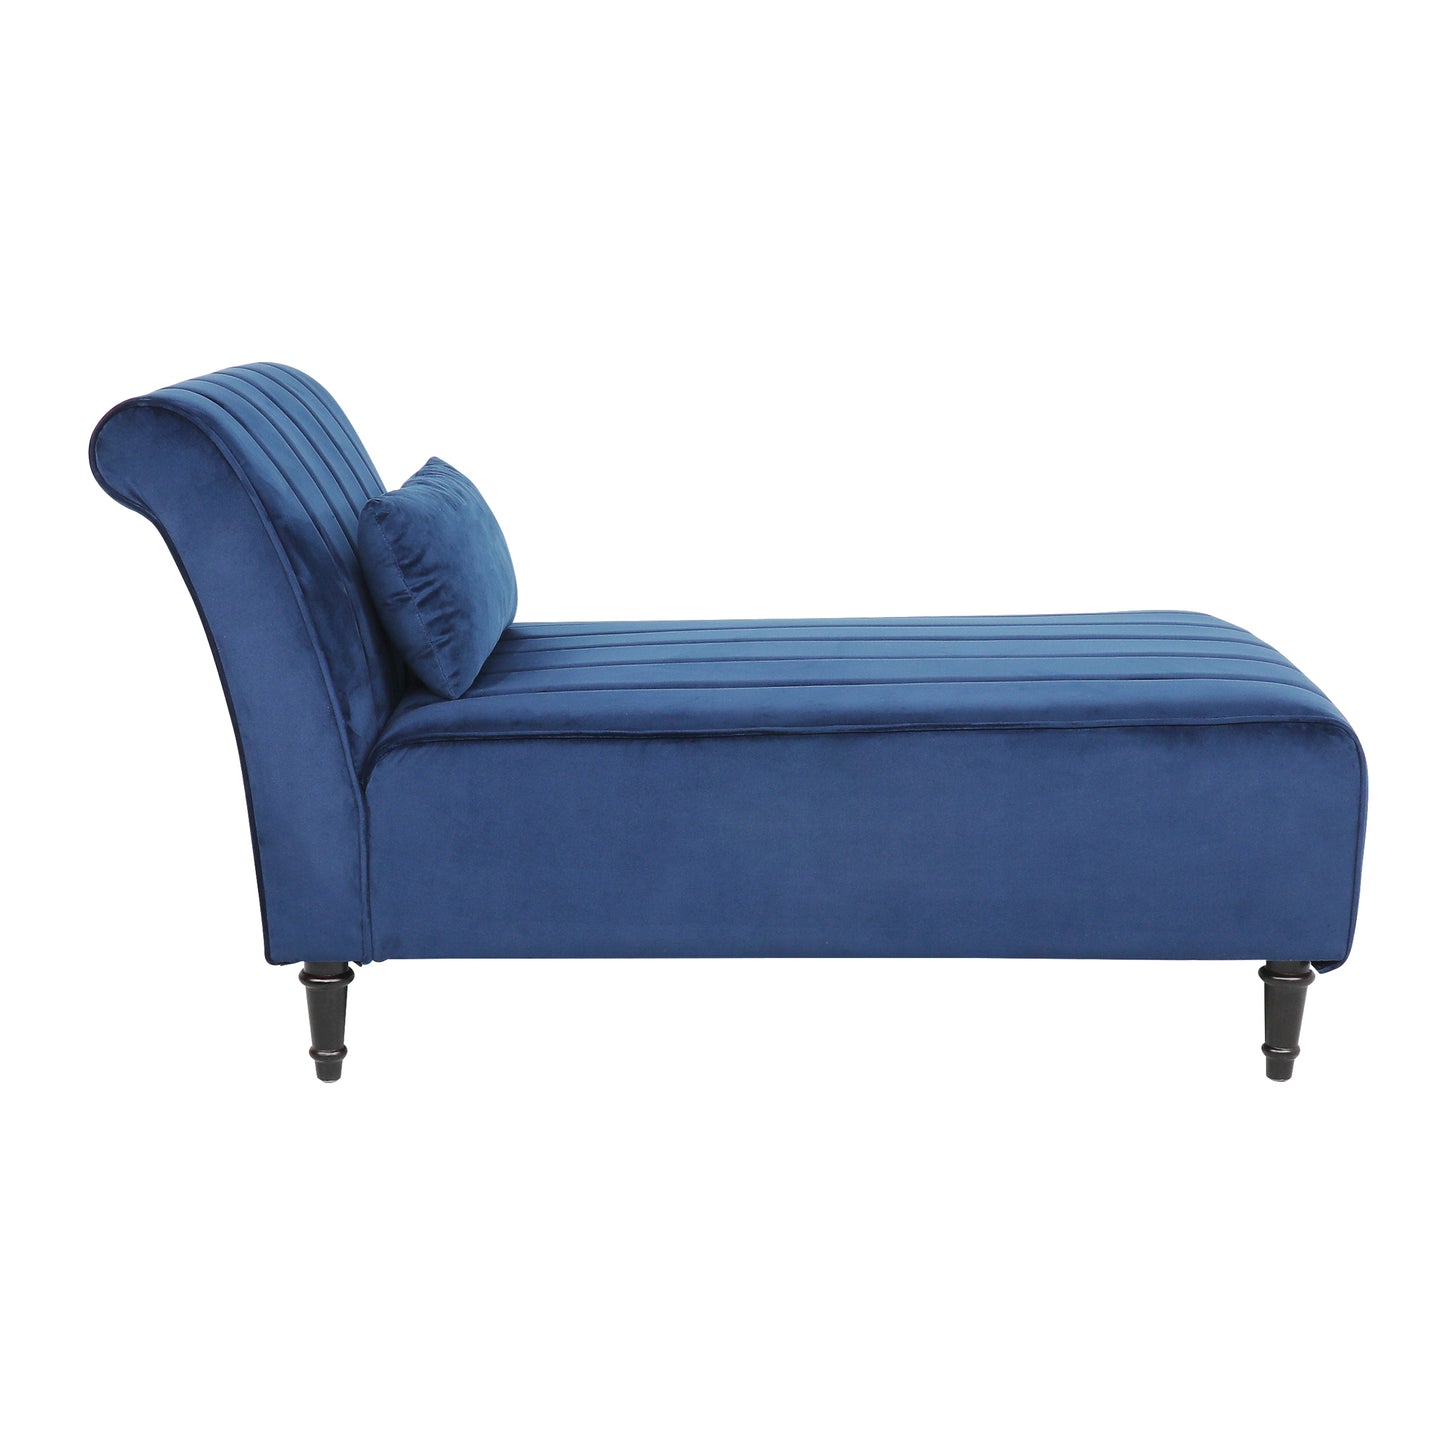 Chairone Armless Velvet Fabric Chaise Lounge